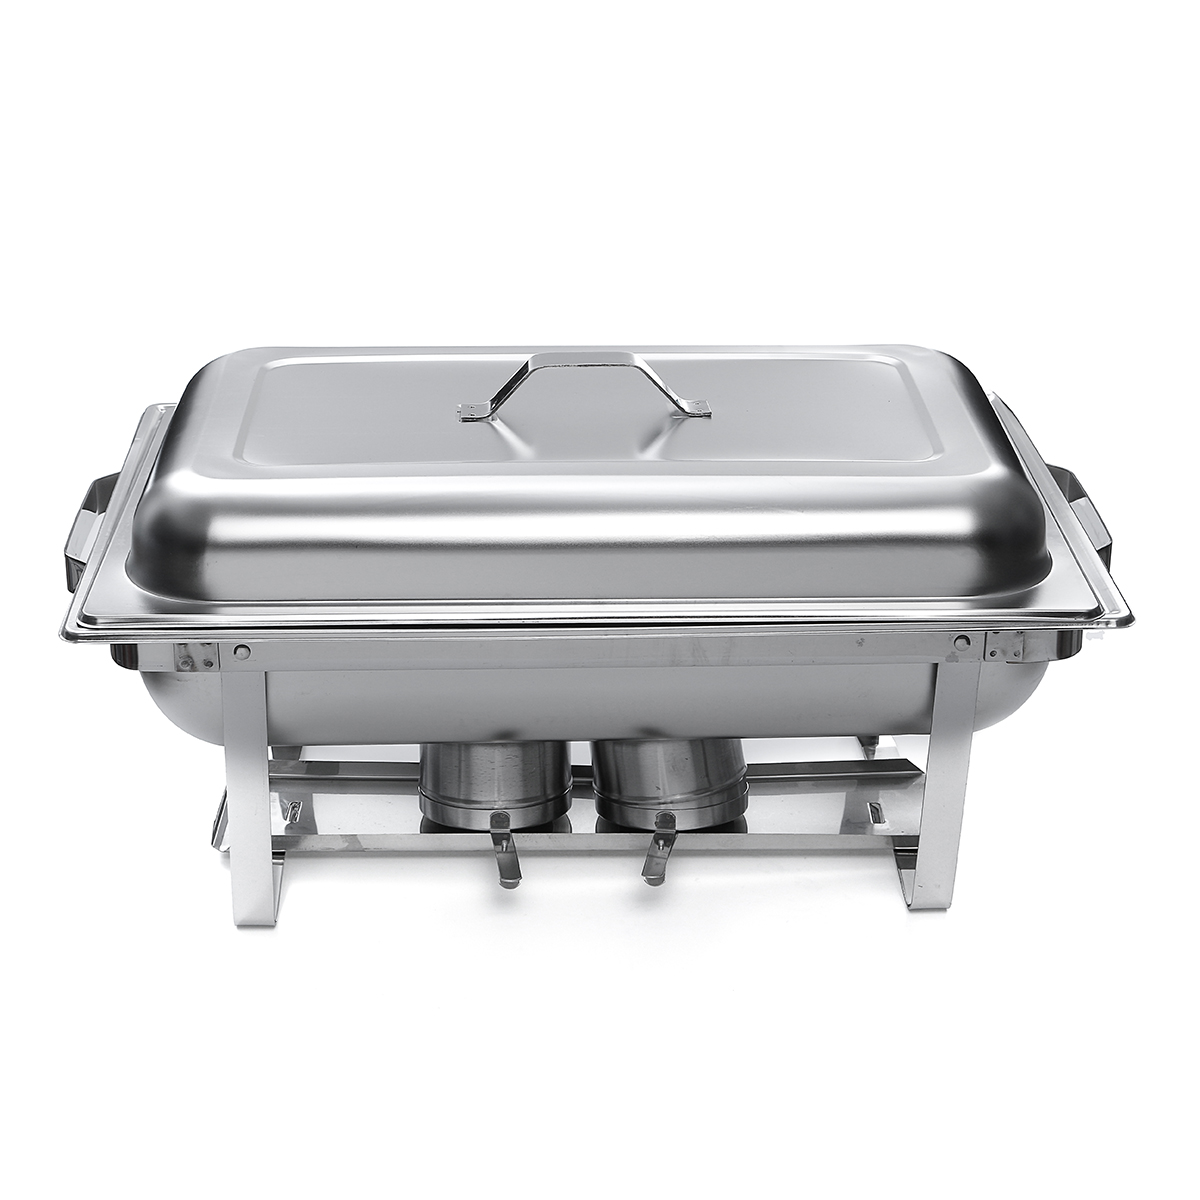 

3 Plates Chafing Dish Tray Buffet Heating Stove Caterer Warmer Stainless Steel